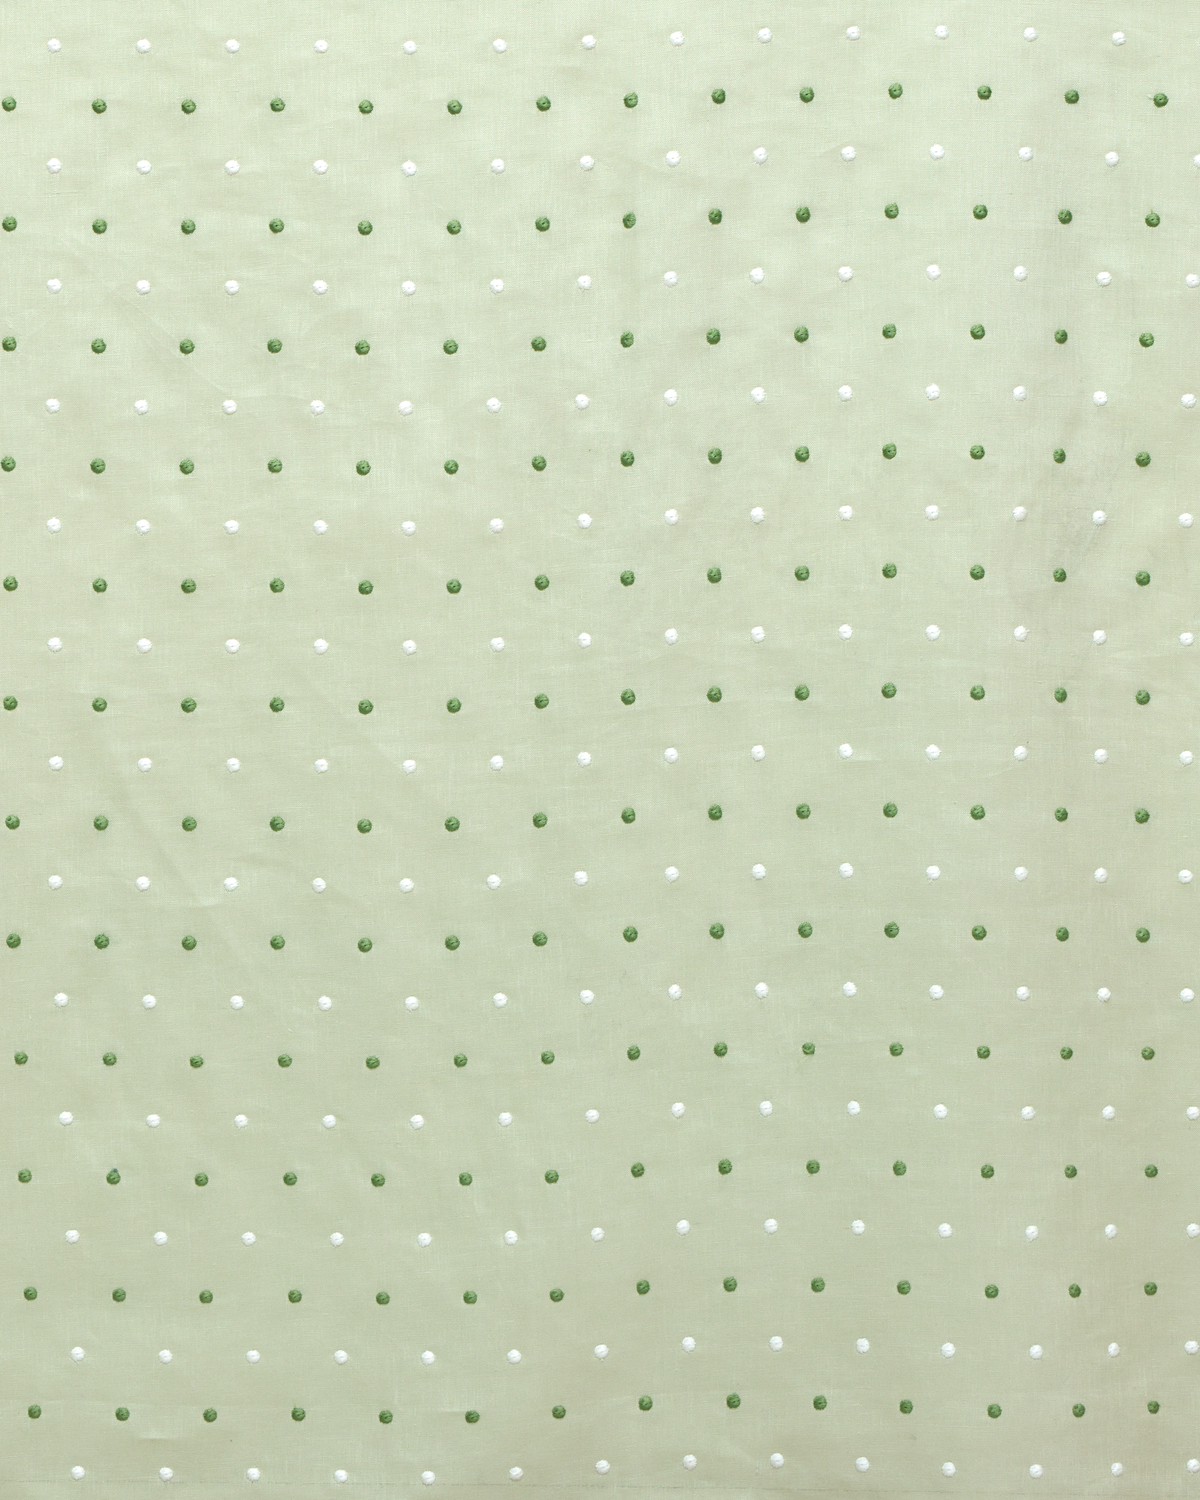 Embroidered Dots Sheer Fabric in Pistachio